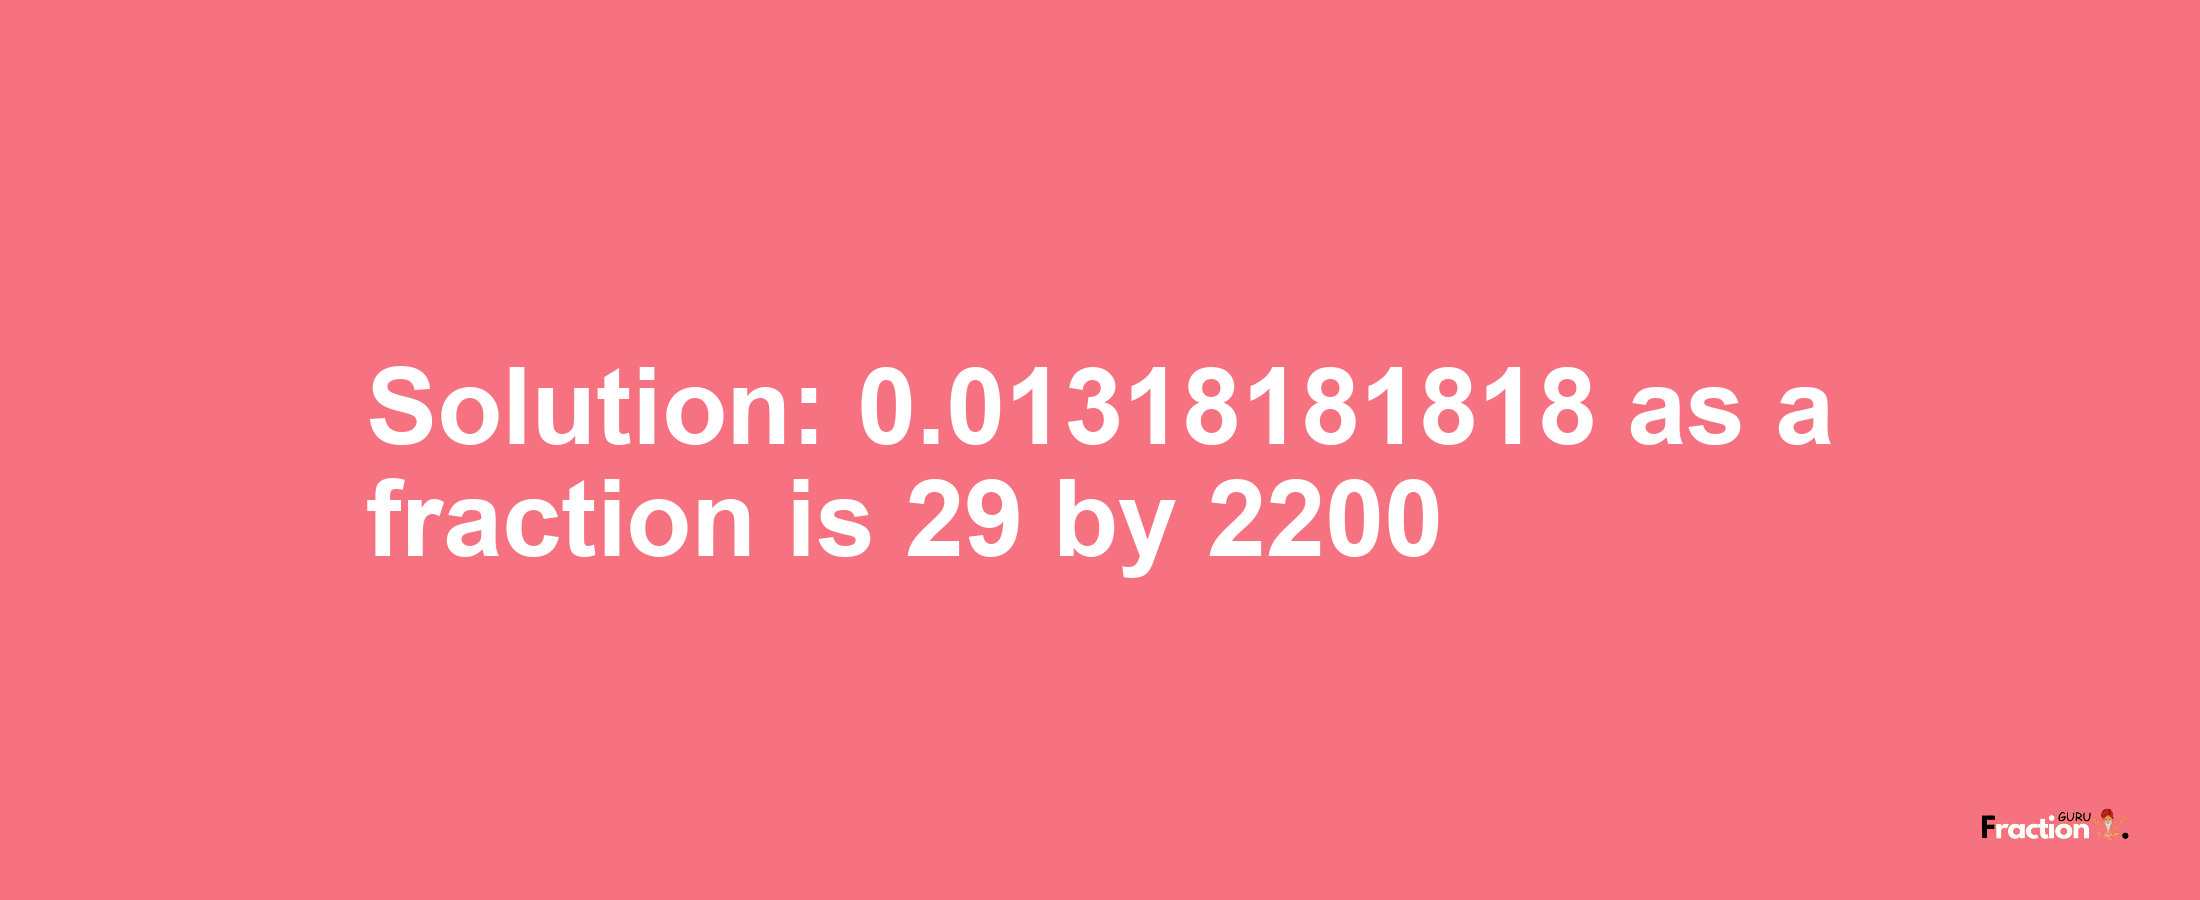 Solution:0.01318181818 as a fraction is 29/2200